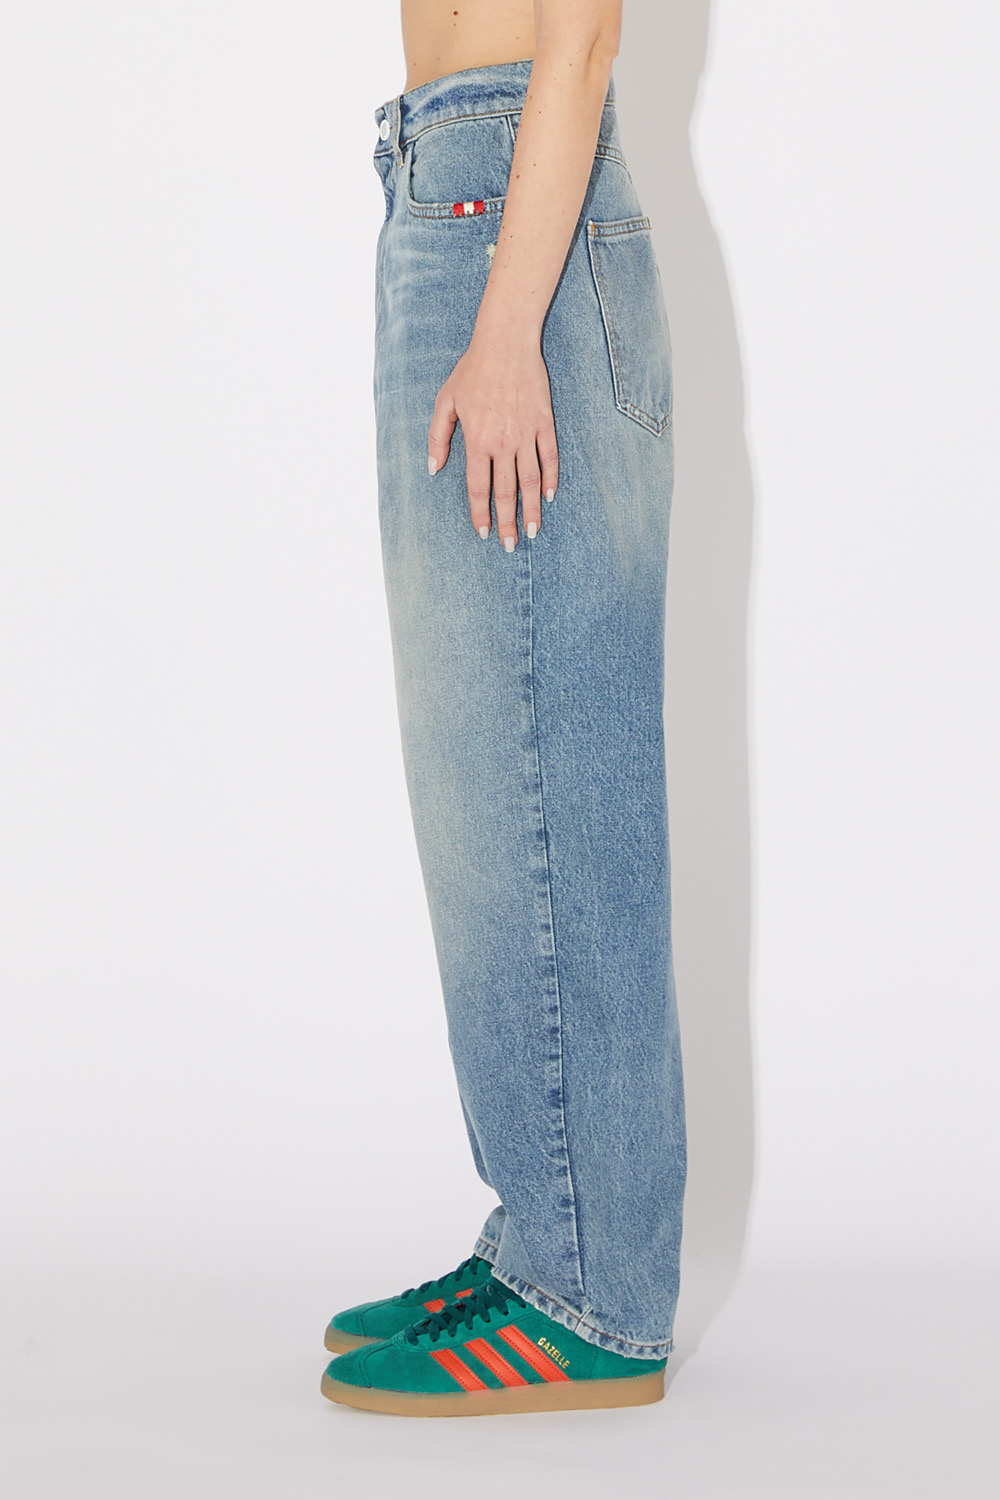 AMISH: REAL VINTAGE BAGGY JEANS